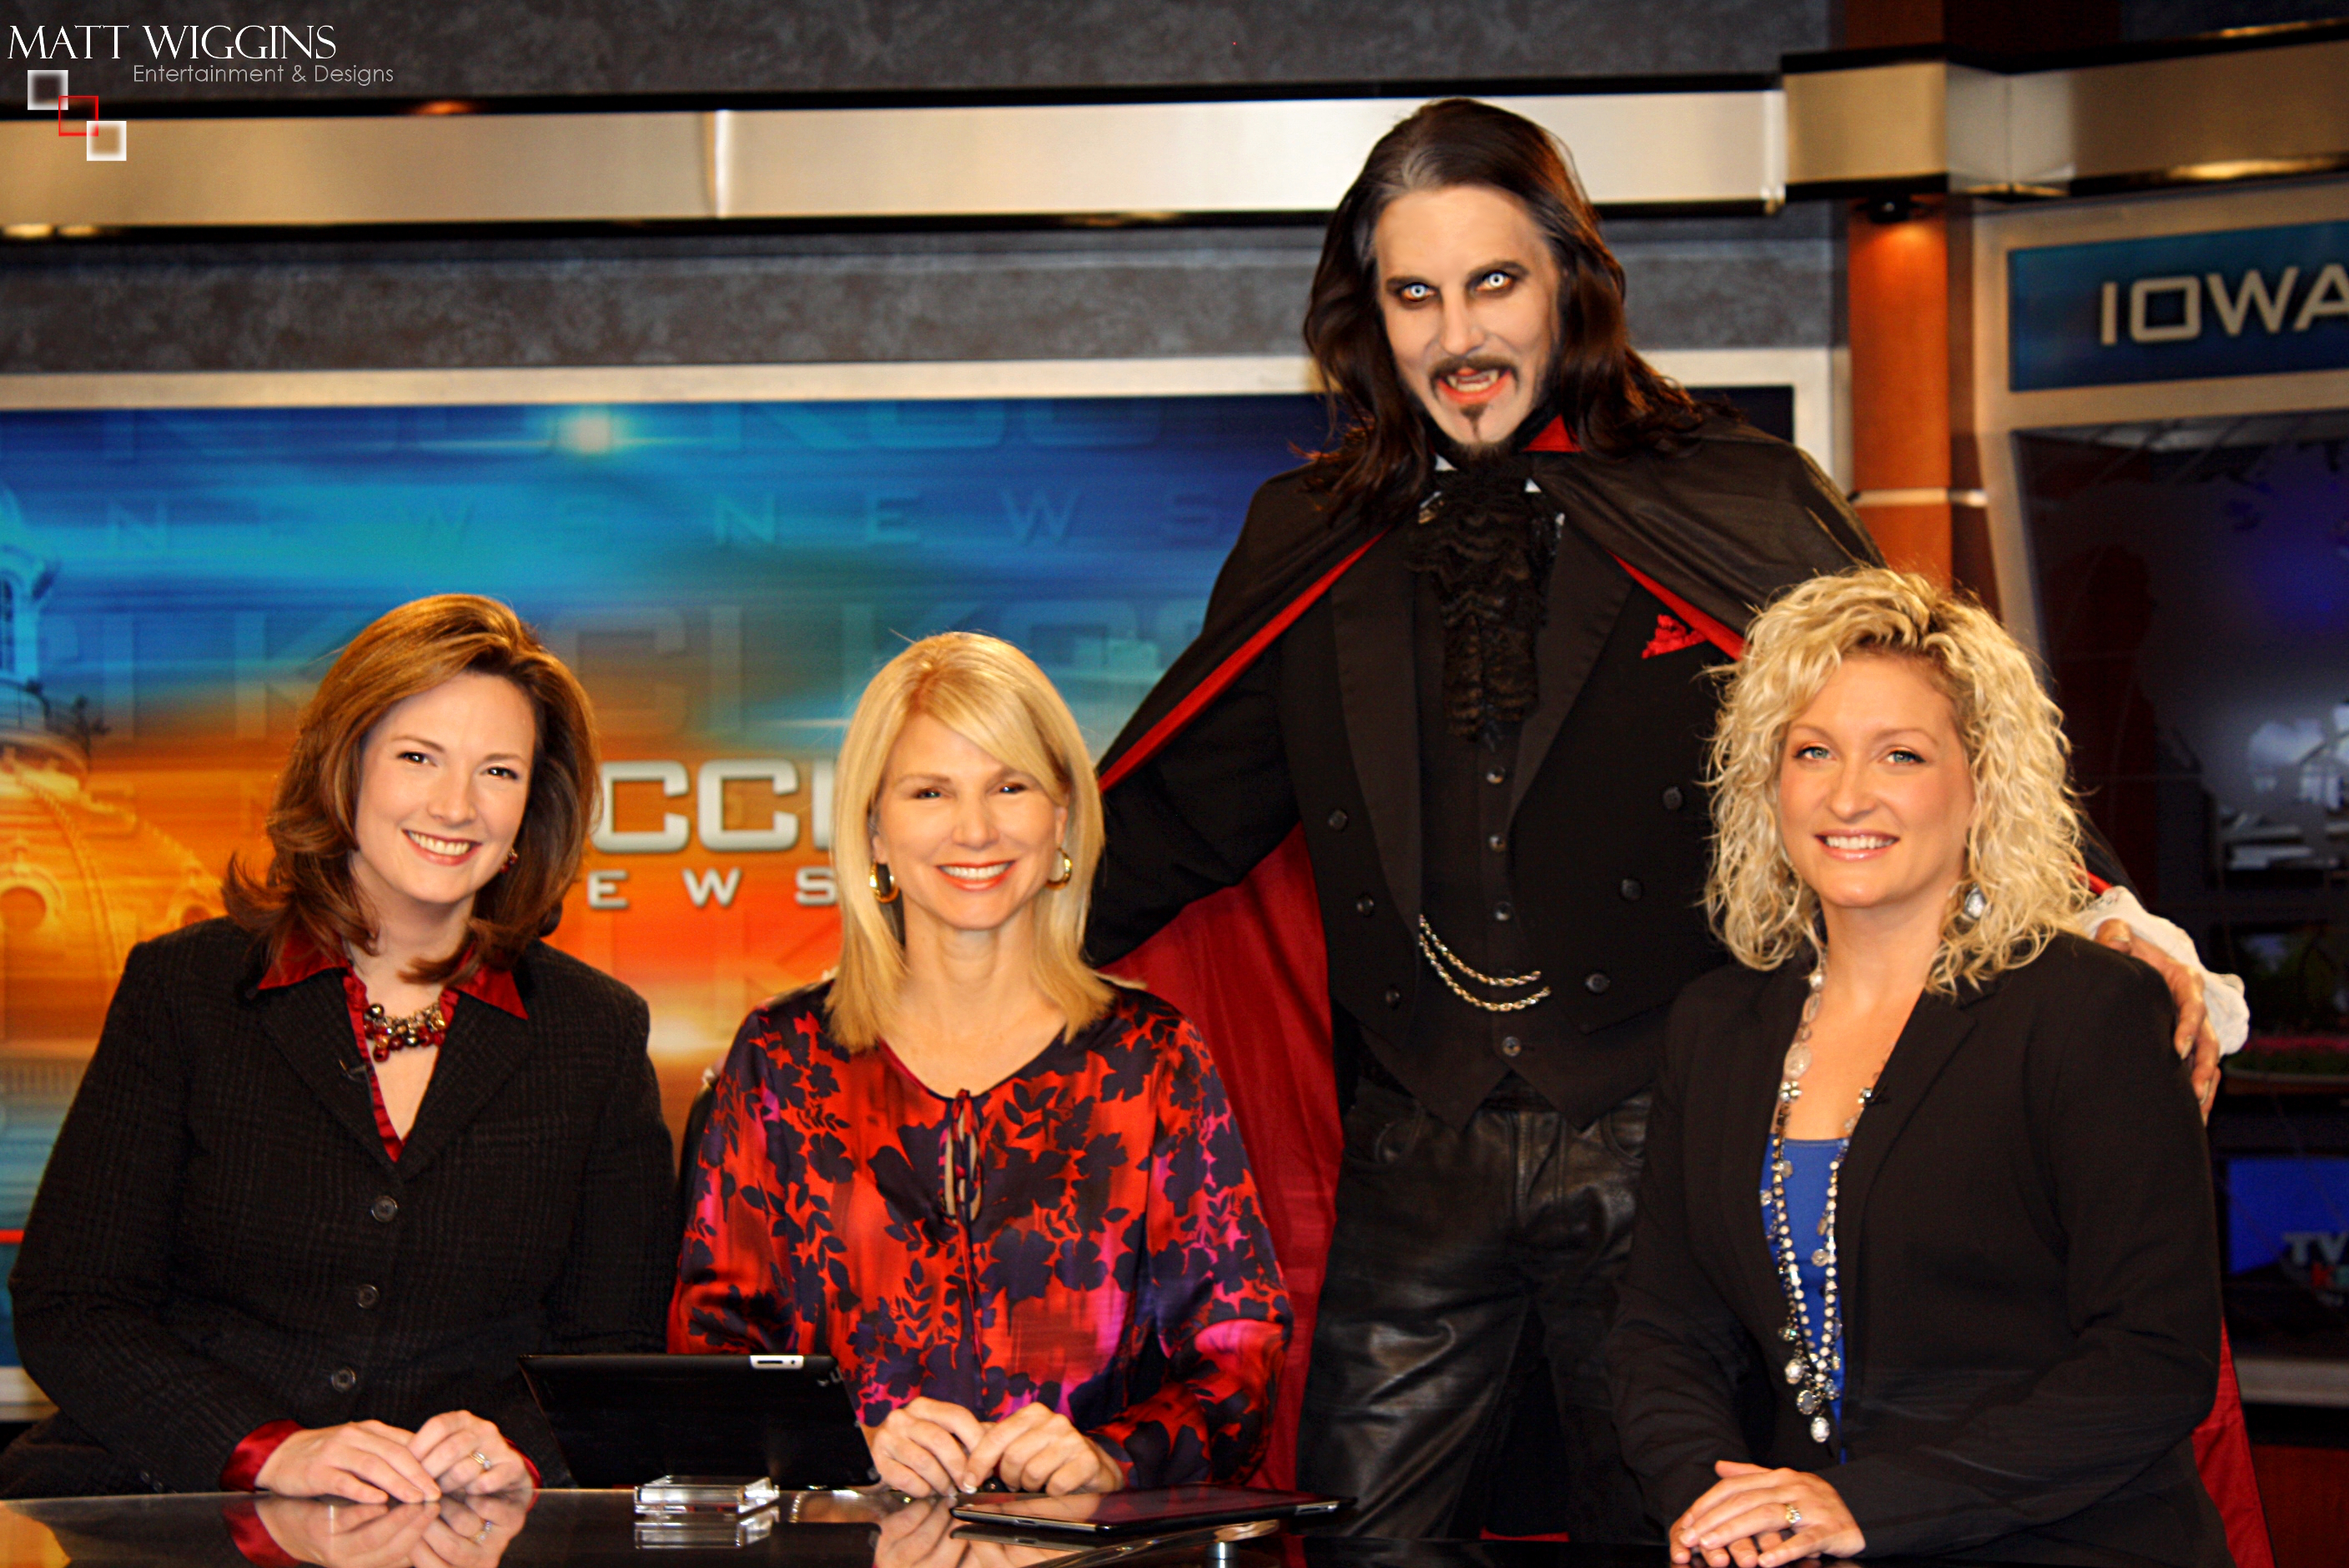 Matt Wiggins with KCCI CH 8 Des Moines News Anchors after appearing in as Dracula in a Live television interview.